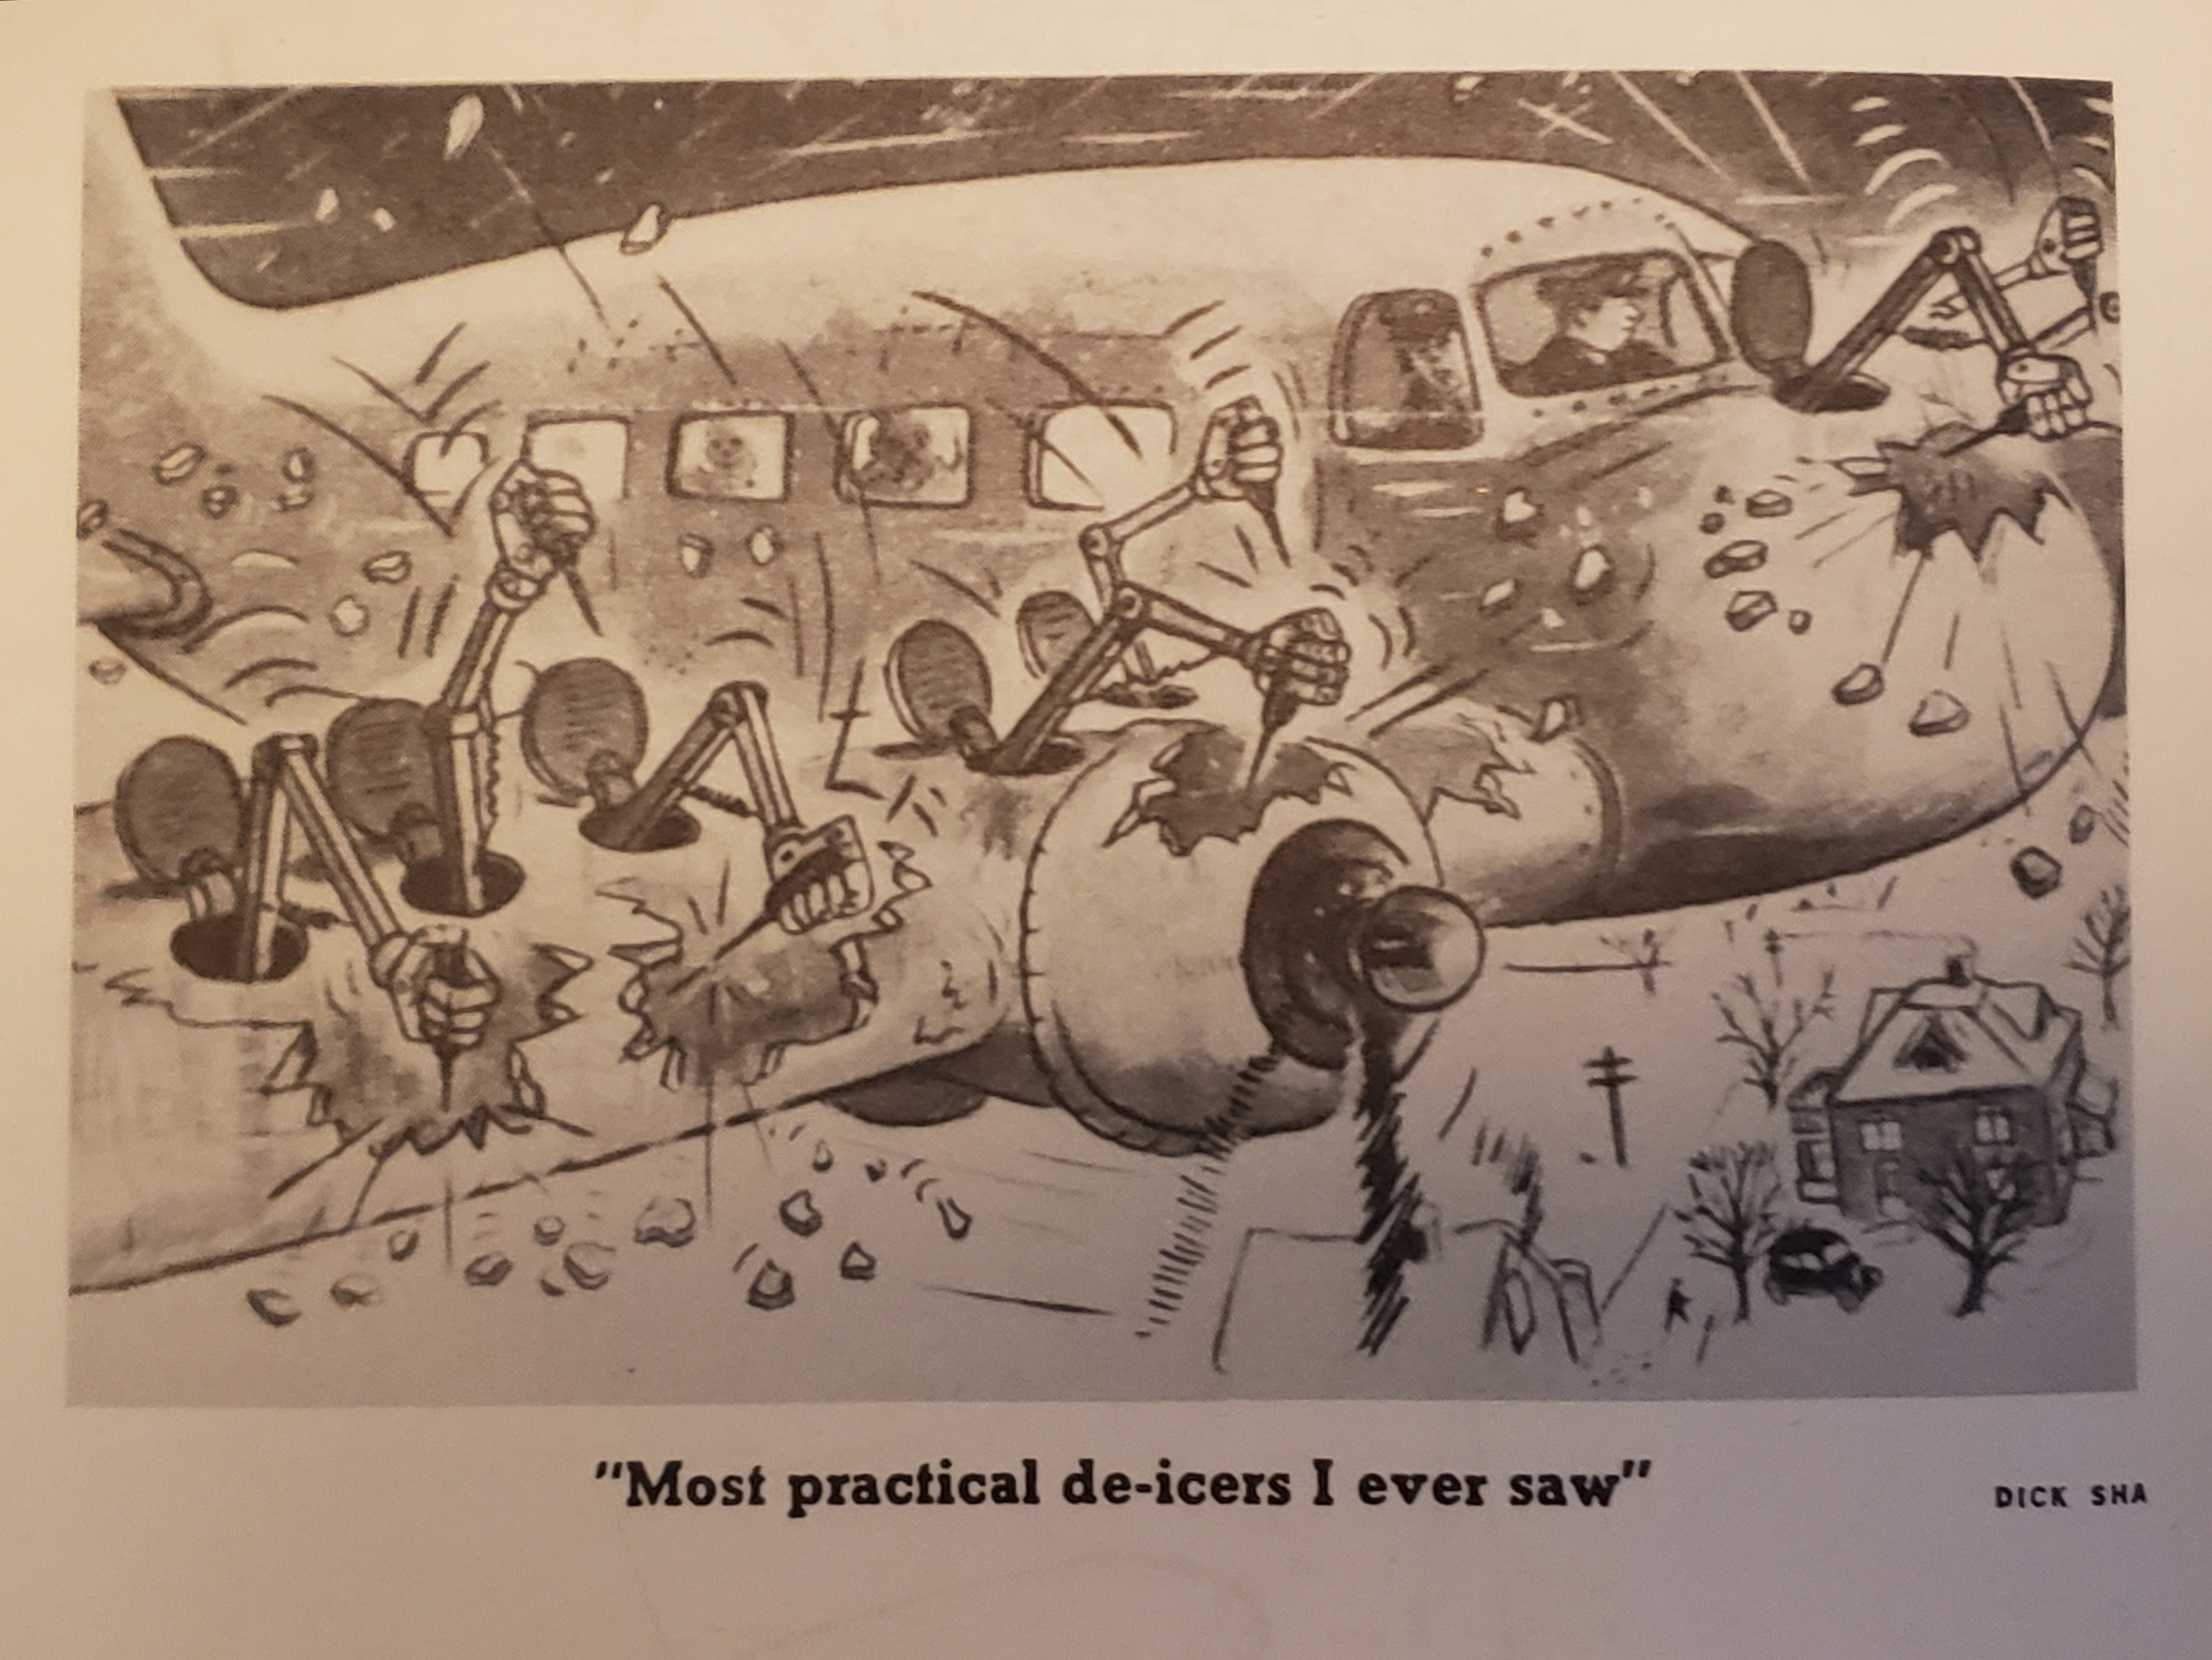 A cartoon drawing of an airplane in flight, 
with pilots visible in the flight deck windows. 
There is snow on the ground below. 
Mechanical arms are coming out from hatches on the airplane, 
removing ice from the wing leading edge with ice picks. 
Caption: "Most practical de-icers I ever saw". Artist: Dick Sha.